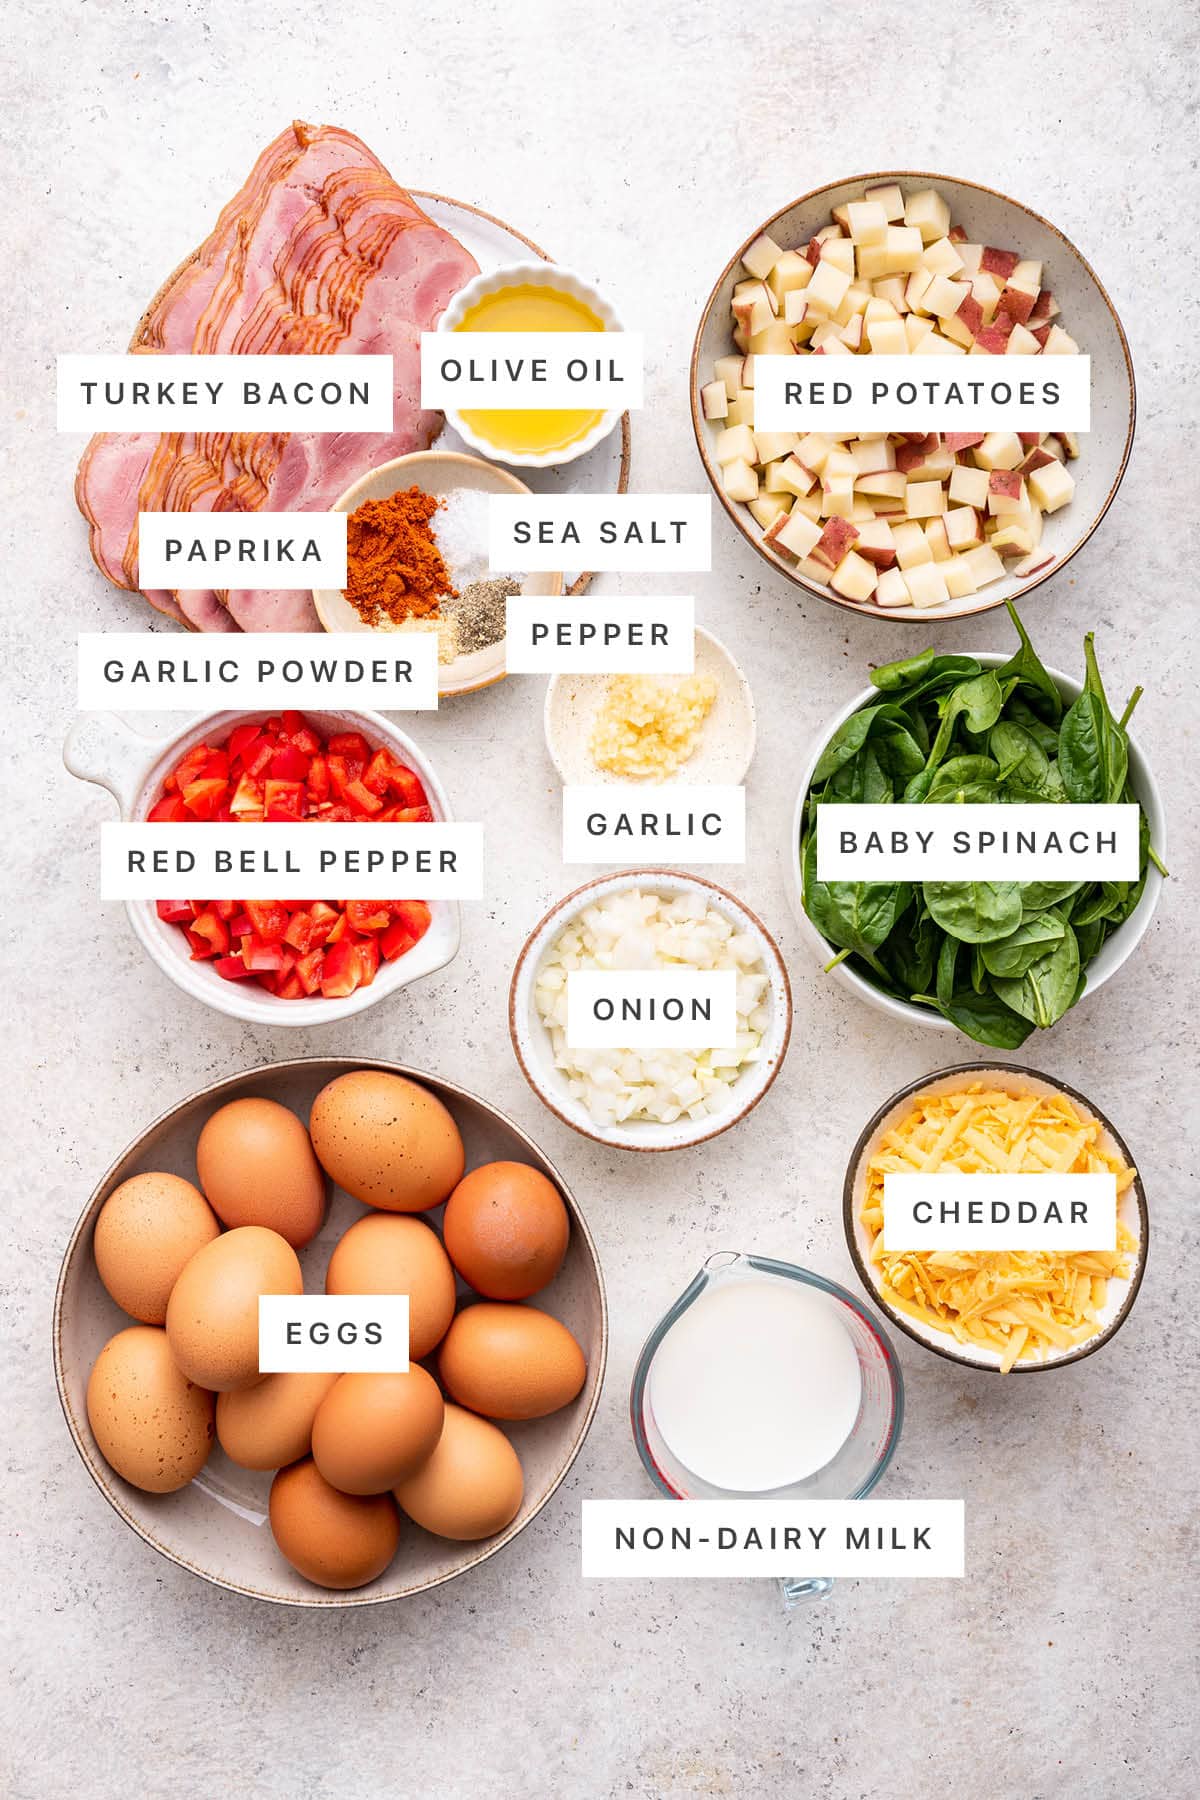 Ingredients measured out to make Make-Ahead Breakfast Casserole: turkey bacon, olive oil, paprika, sea salt, pepper, garlic powder, garlic, red potatoes, red bell pepper, onion, baby spinach, eggs, non-dairy milk and cheddar.